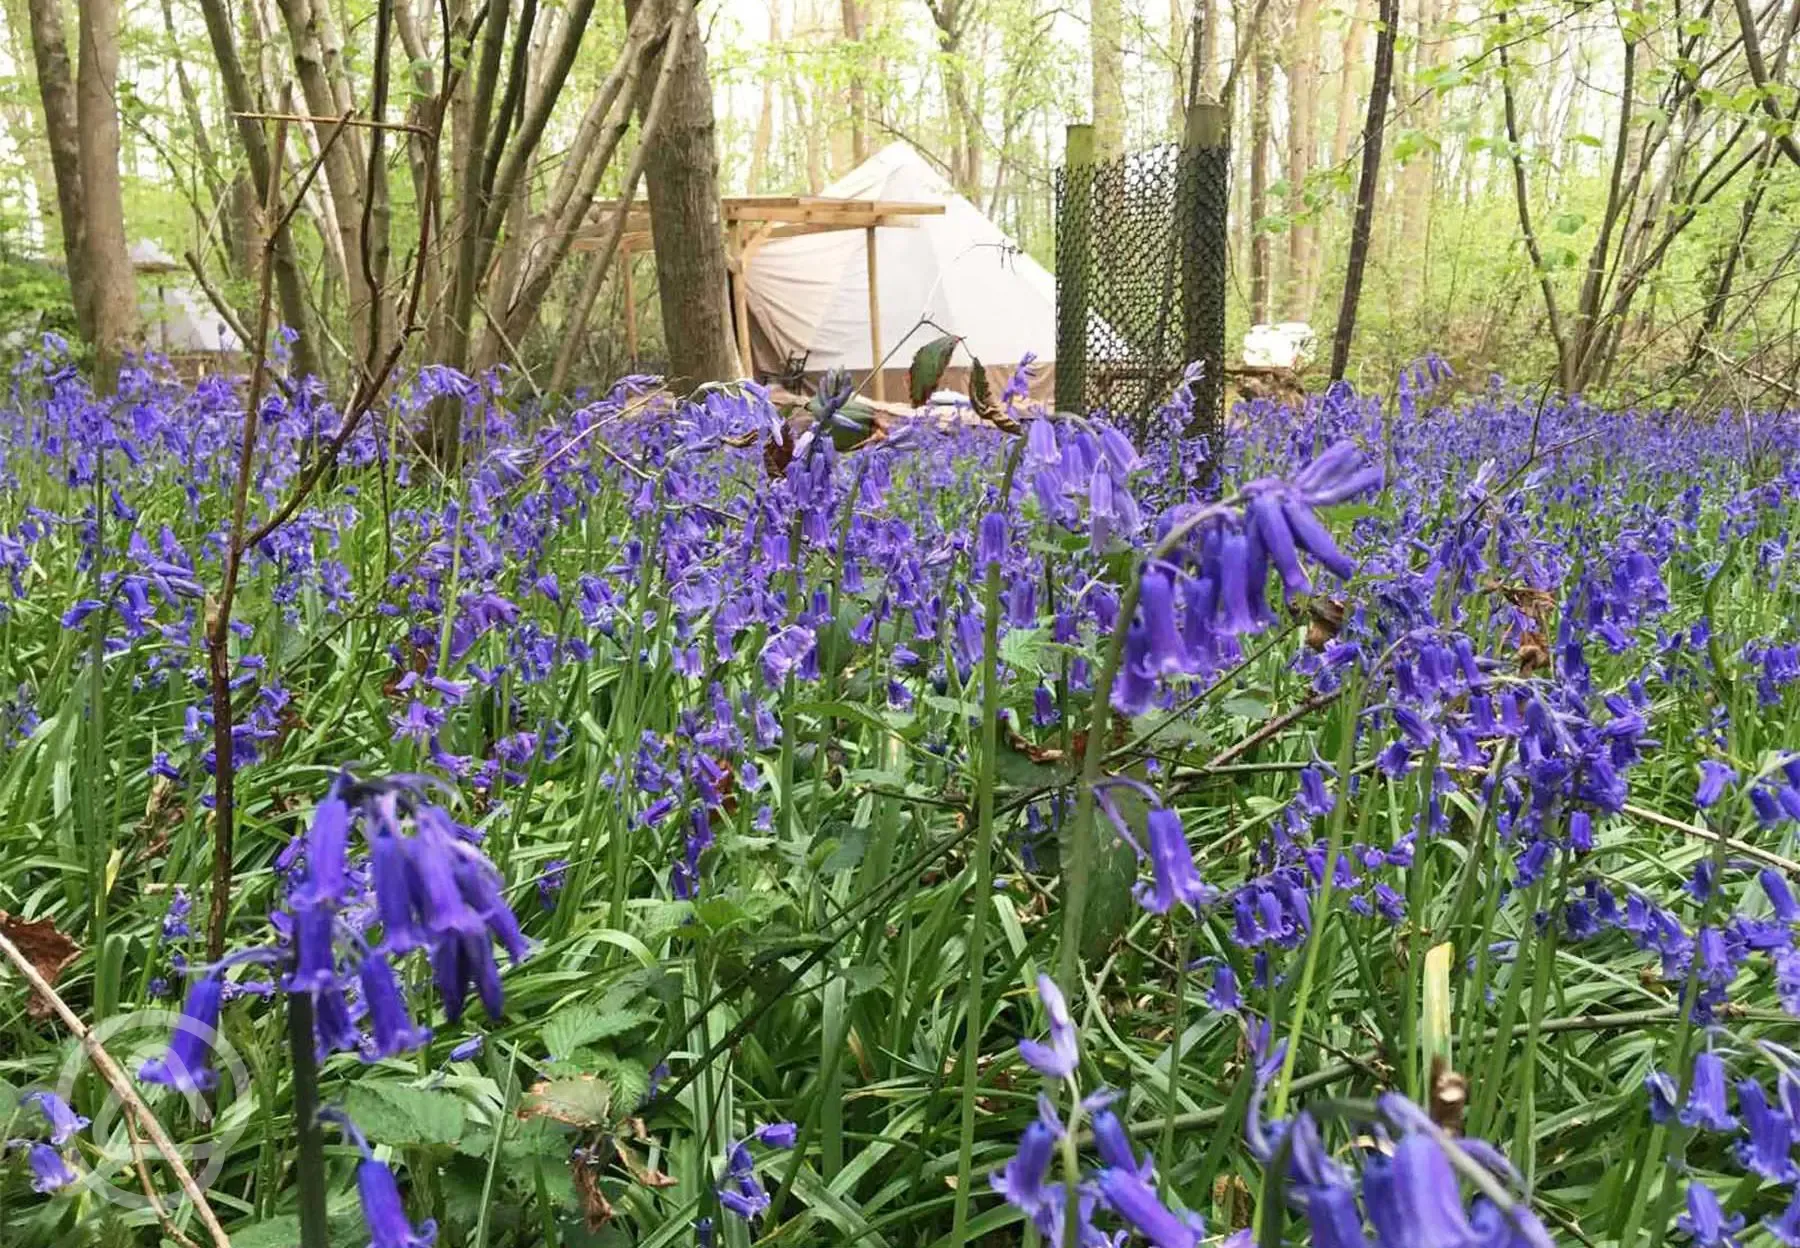 Bell tent surrounded by Bluebells